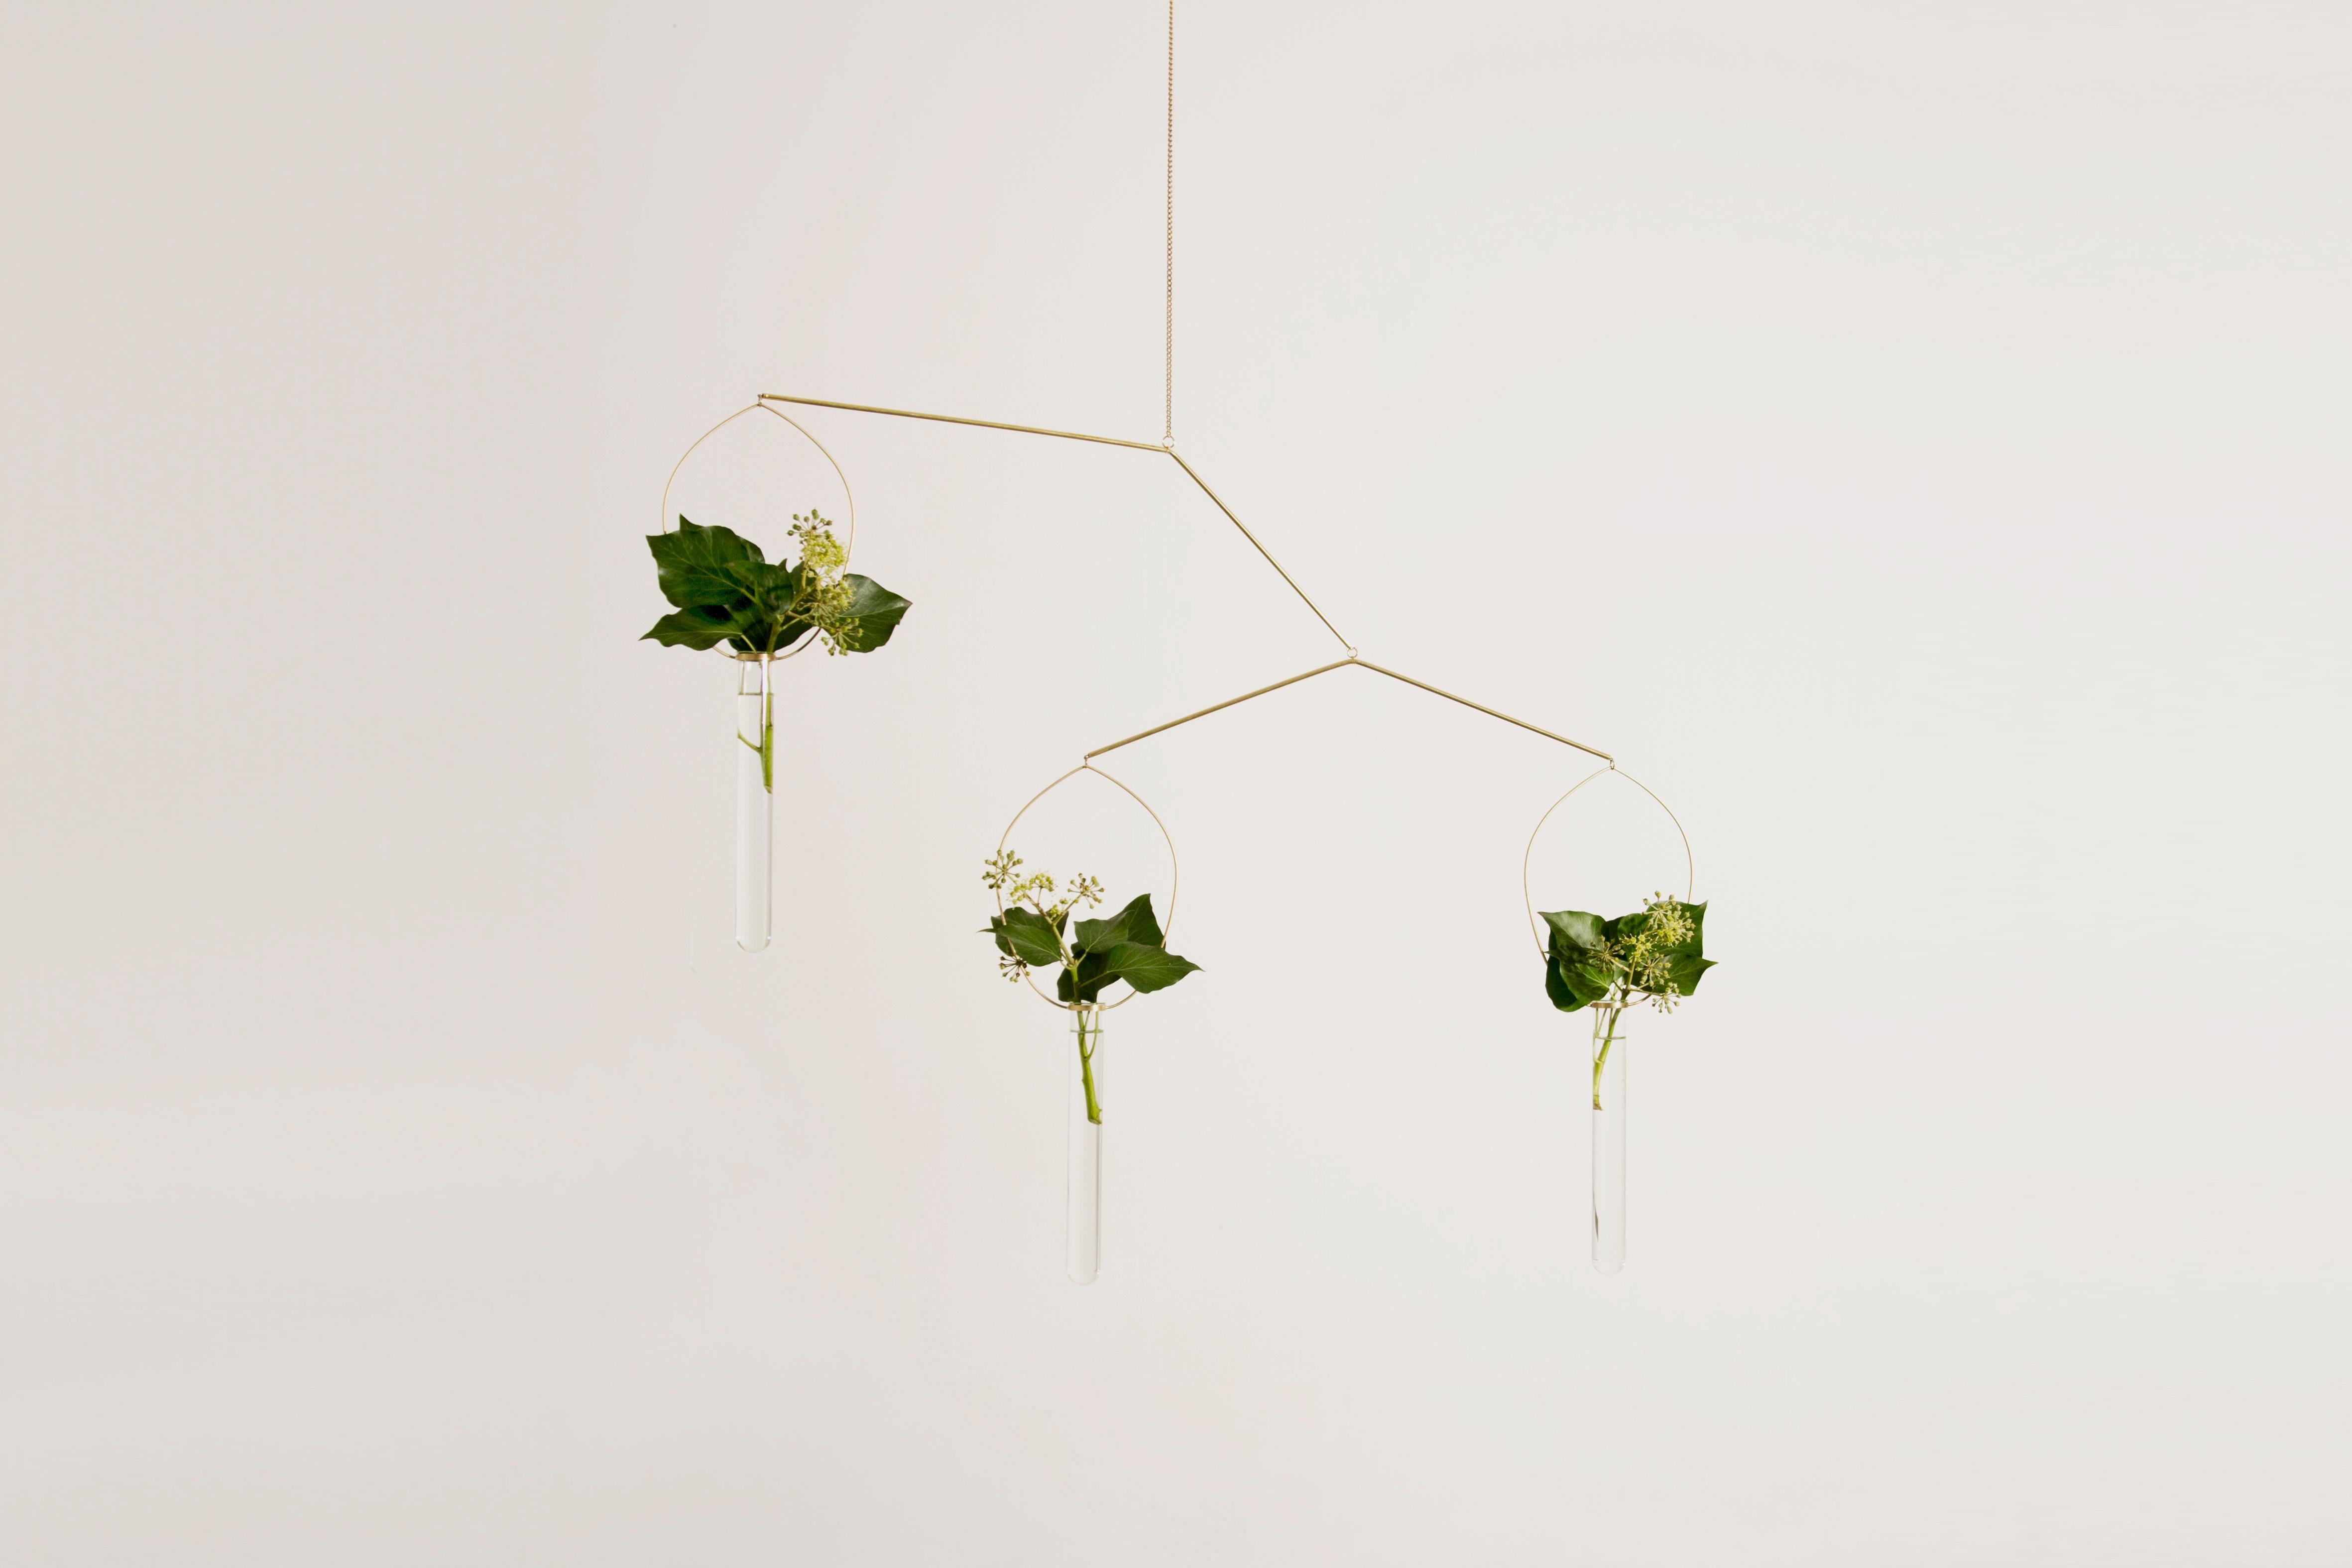 Eden, sculpture
Eden is a kinetic sculpture, composed by small floating vases that celebrate natural beauty and balance.
Materials: handcrafted solid brass with satin finish, borosilicate glass
Dimensions: 160 x 75 x 80 cm

The project is inspired